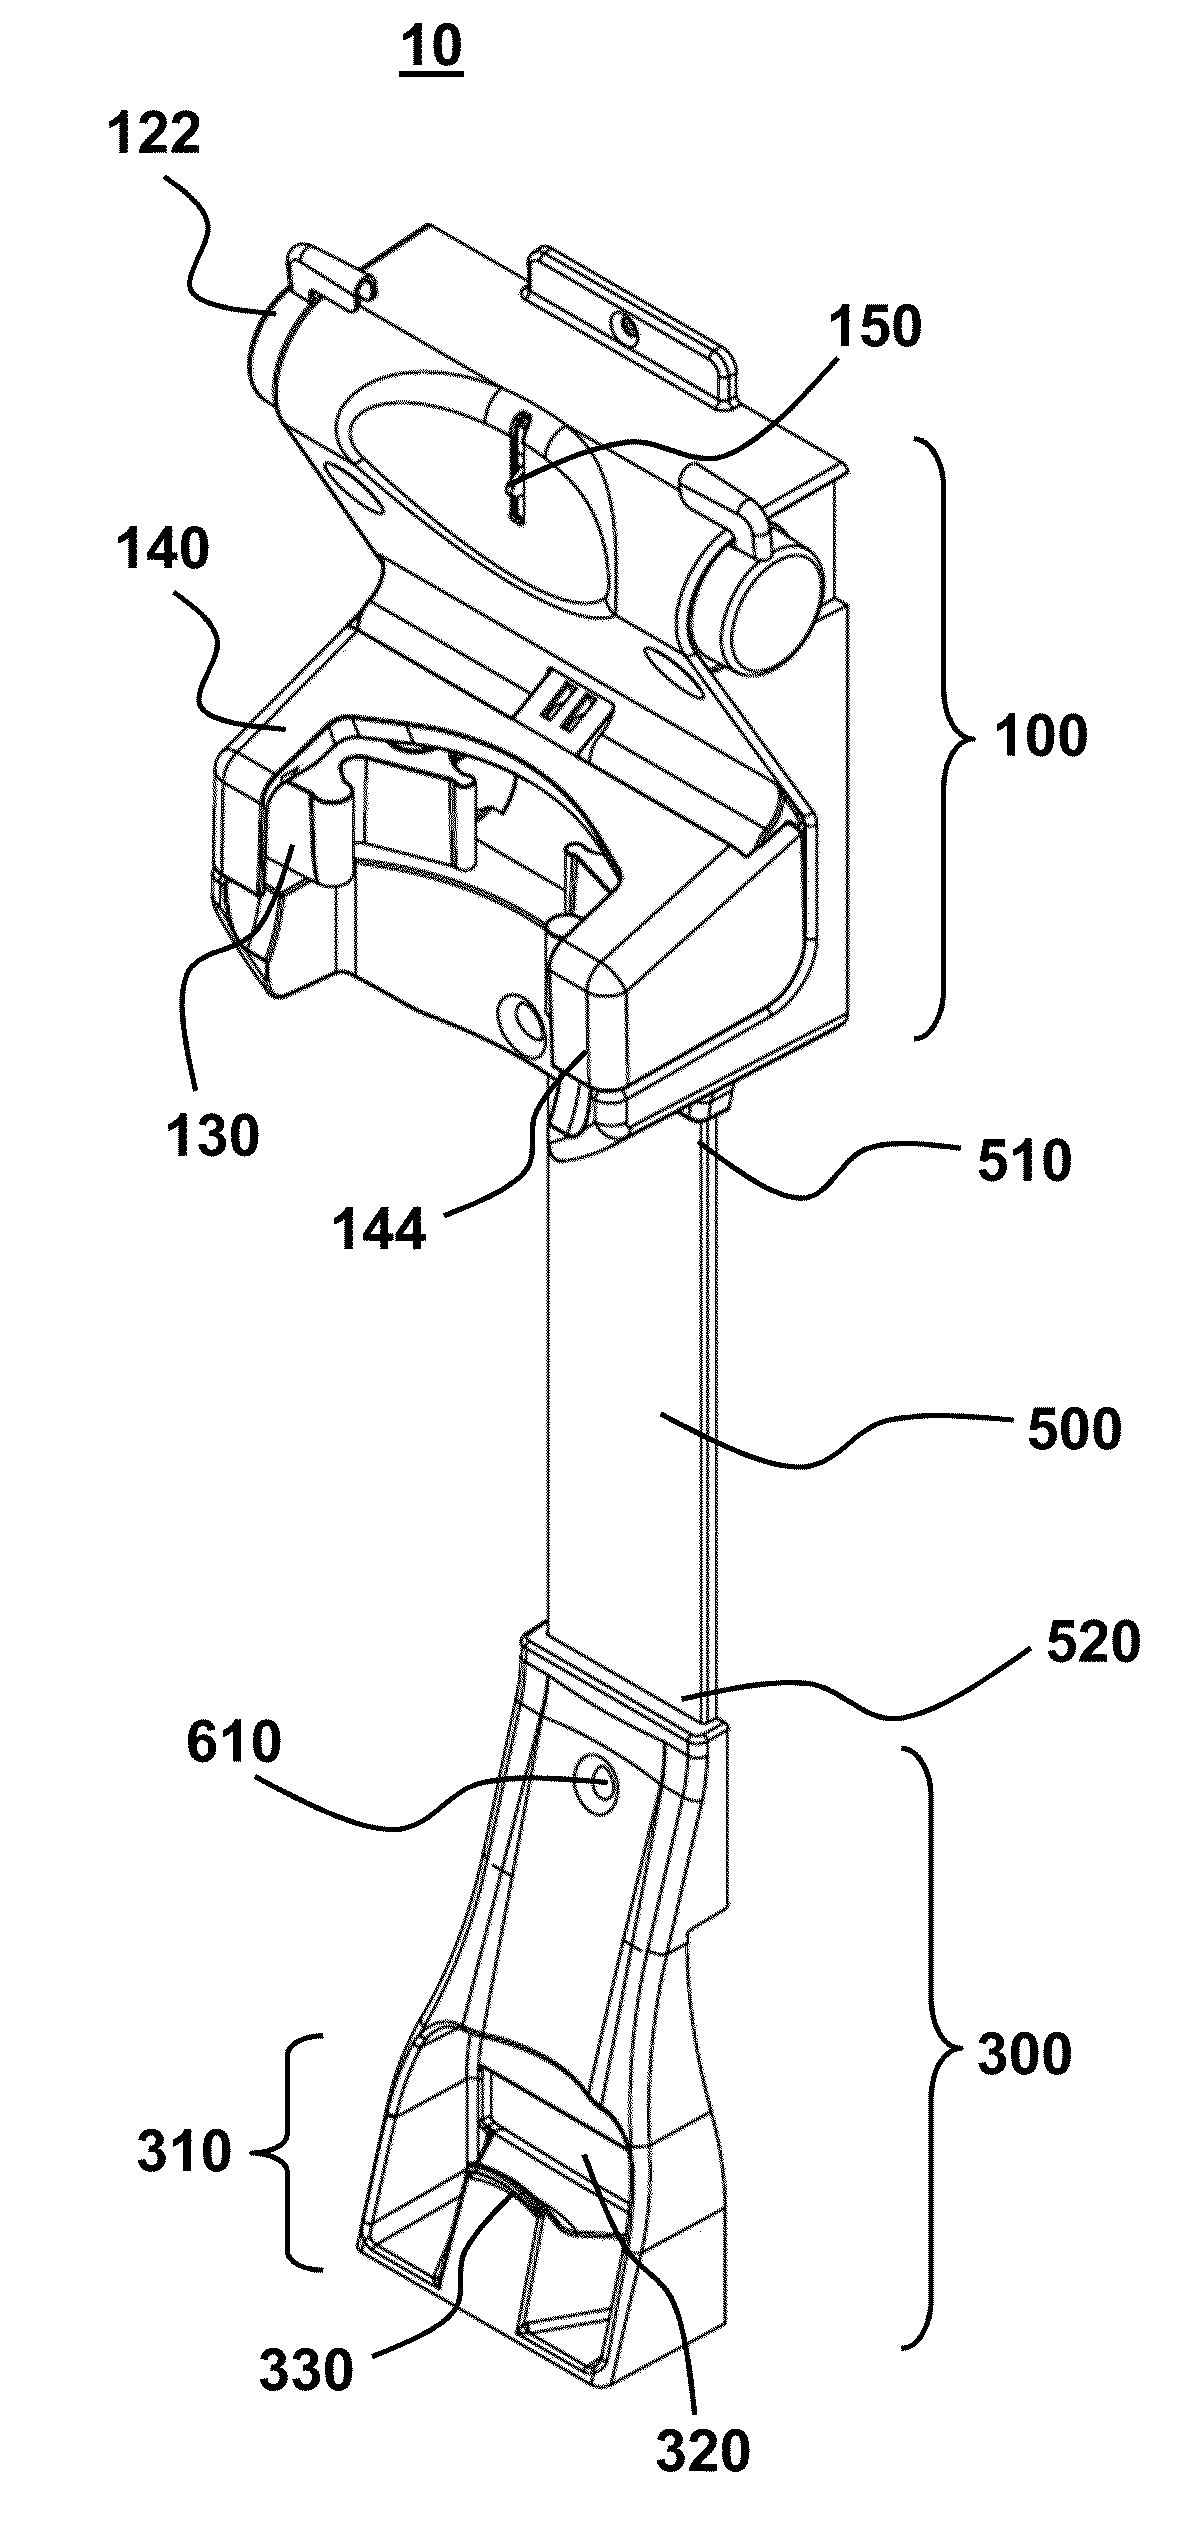 Infusion management system and holder